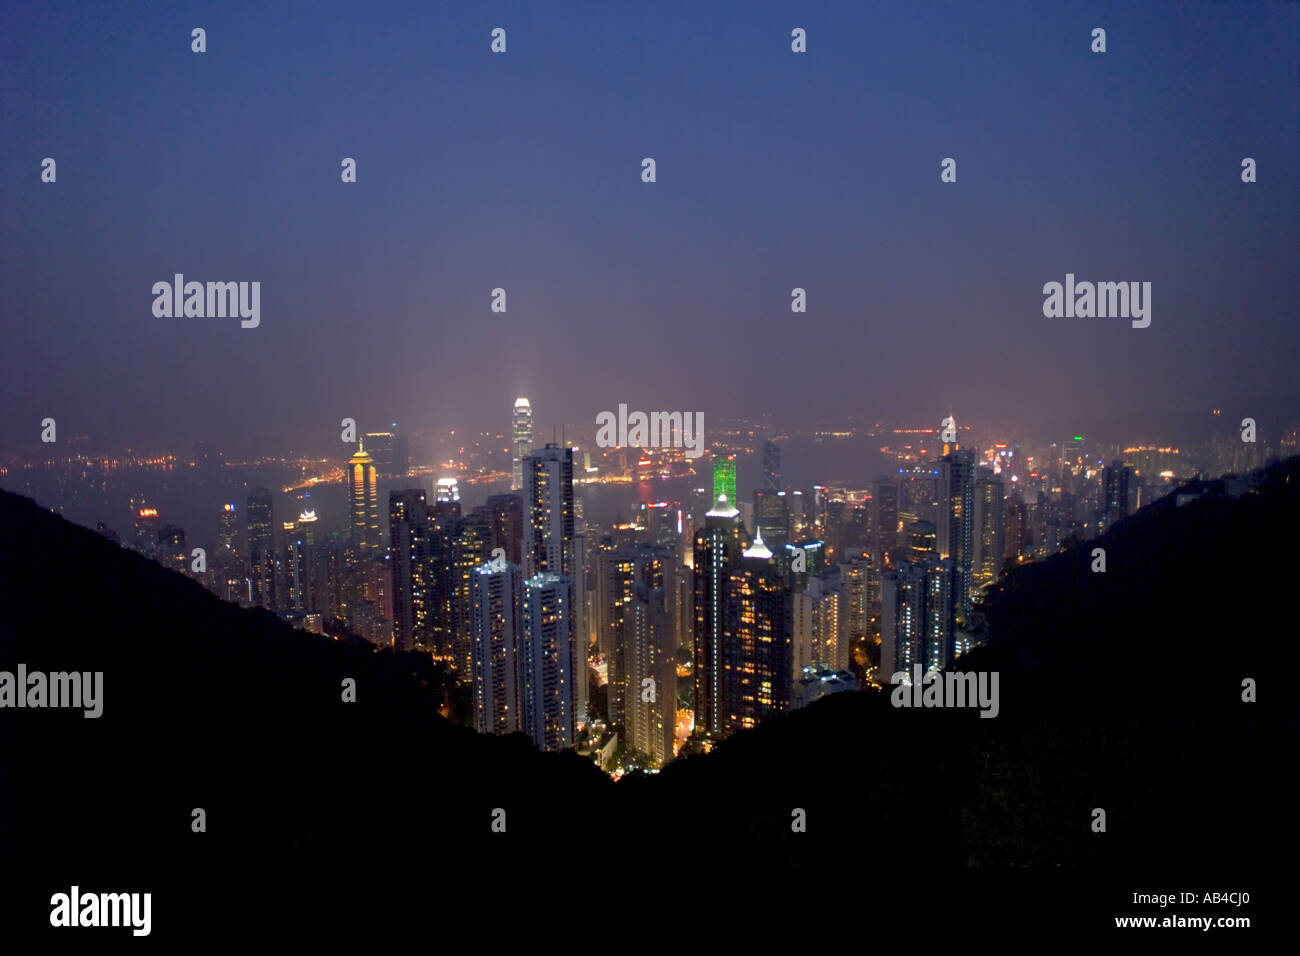 An aerial view over Hong Kong and Victoria Harbour at night/sunset/dusk taken from the Peak. Stock Photo